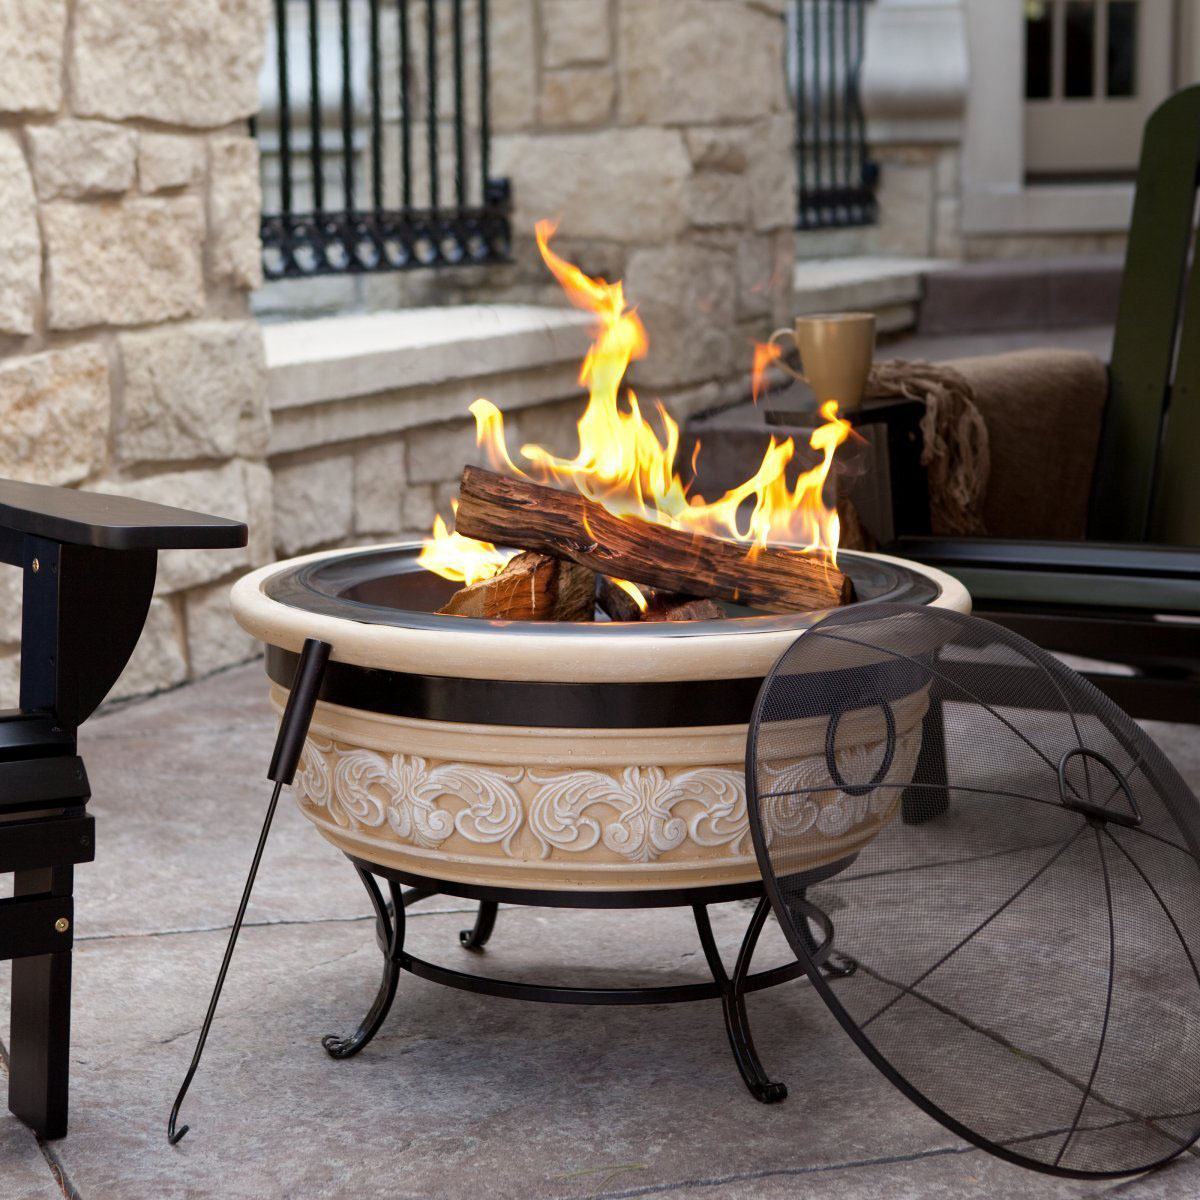 fire pit pits portable patio chiminea firepit wood burning fireplace yard ring